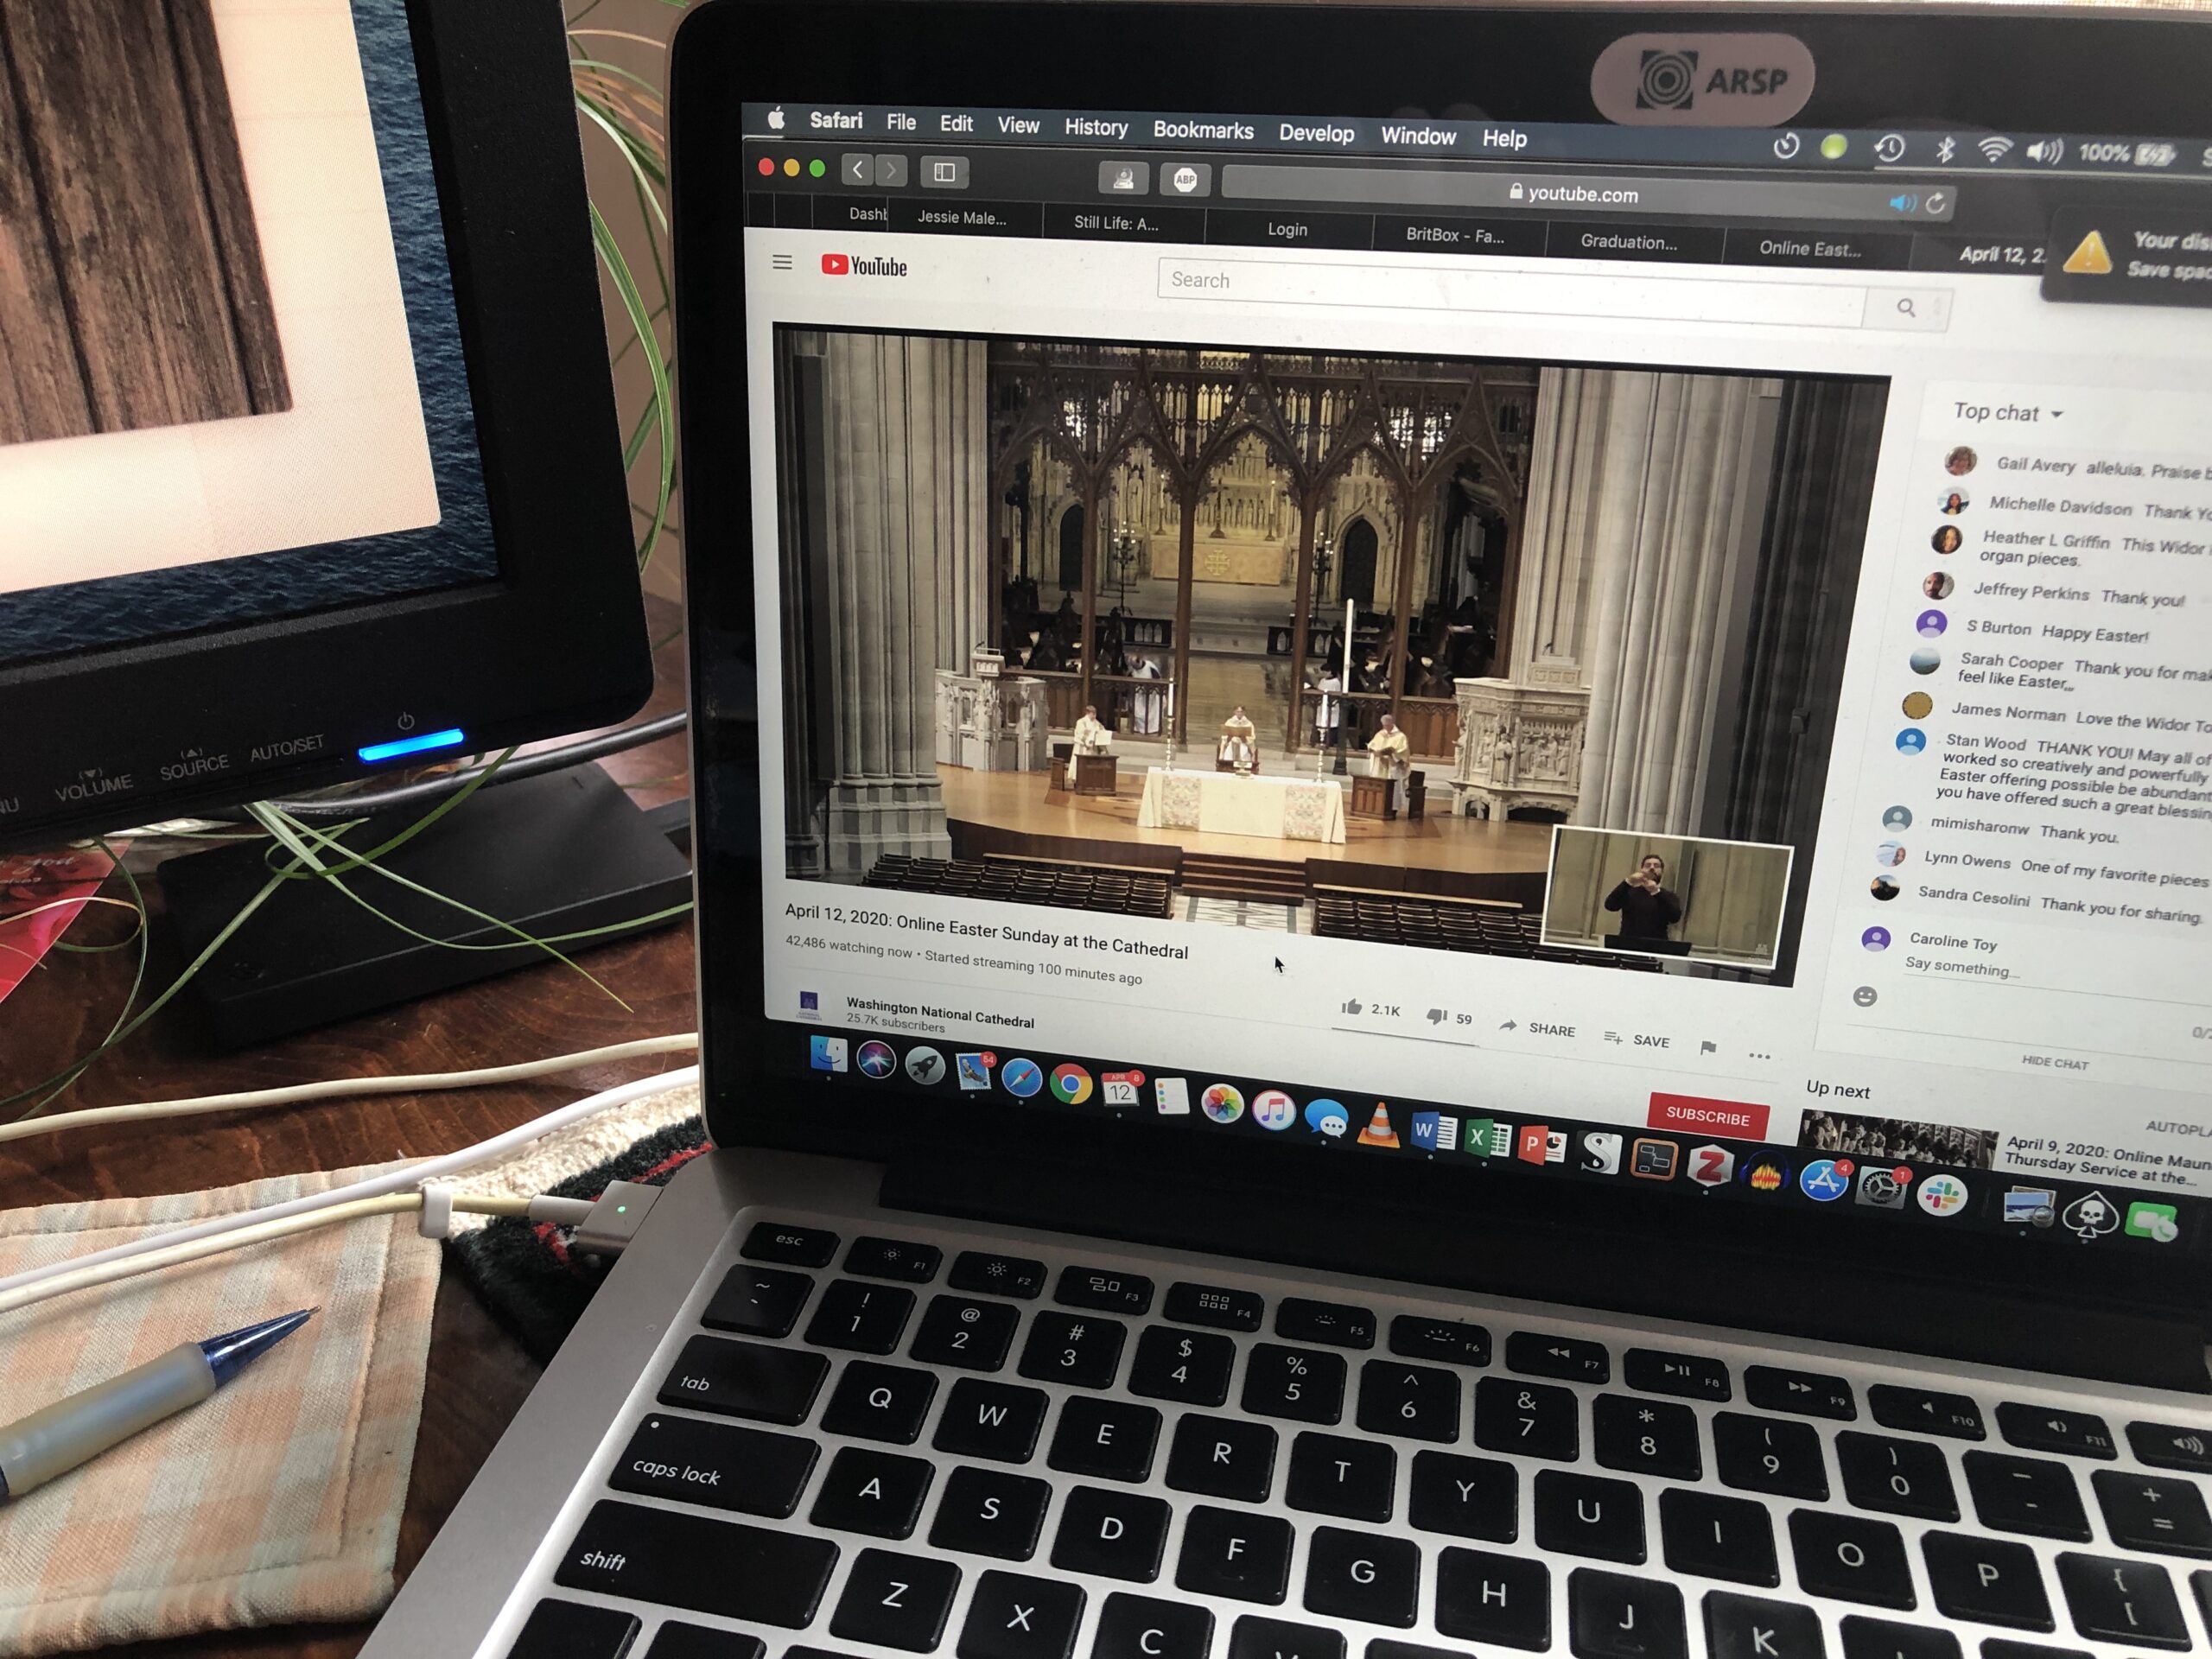 Open laptop, showing video from Washington National Cathedral on the left and a chat dialog on the right